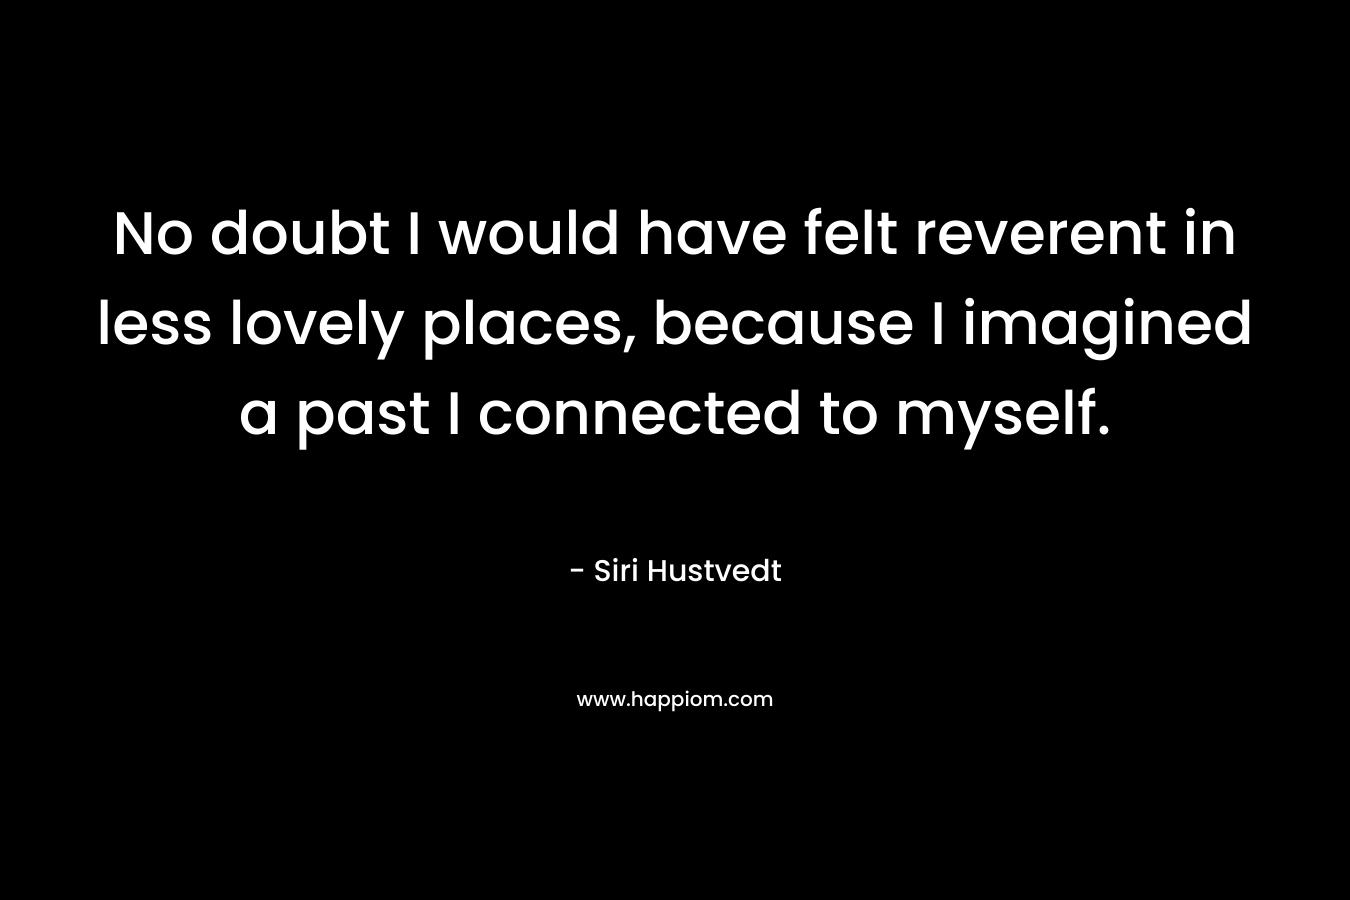 No doubt I would have felt reverent in less lovely places, because I imagined a past I connected to myself.